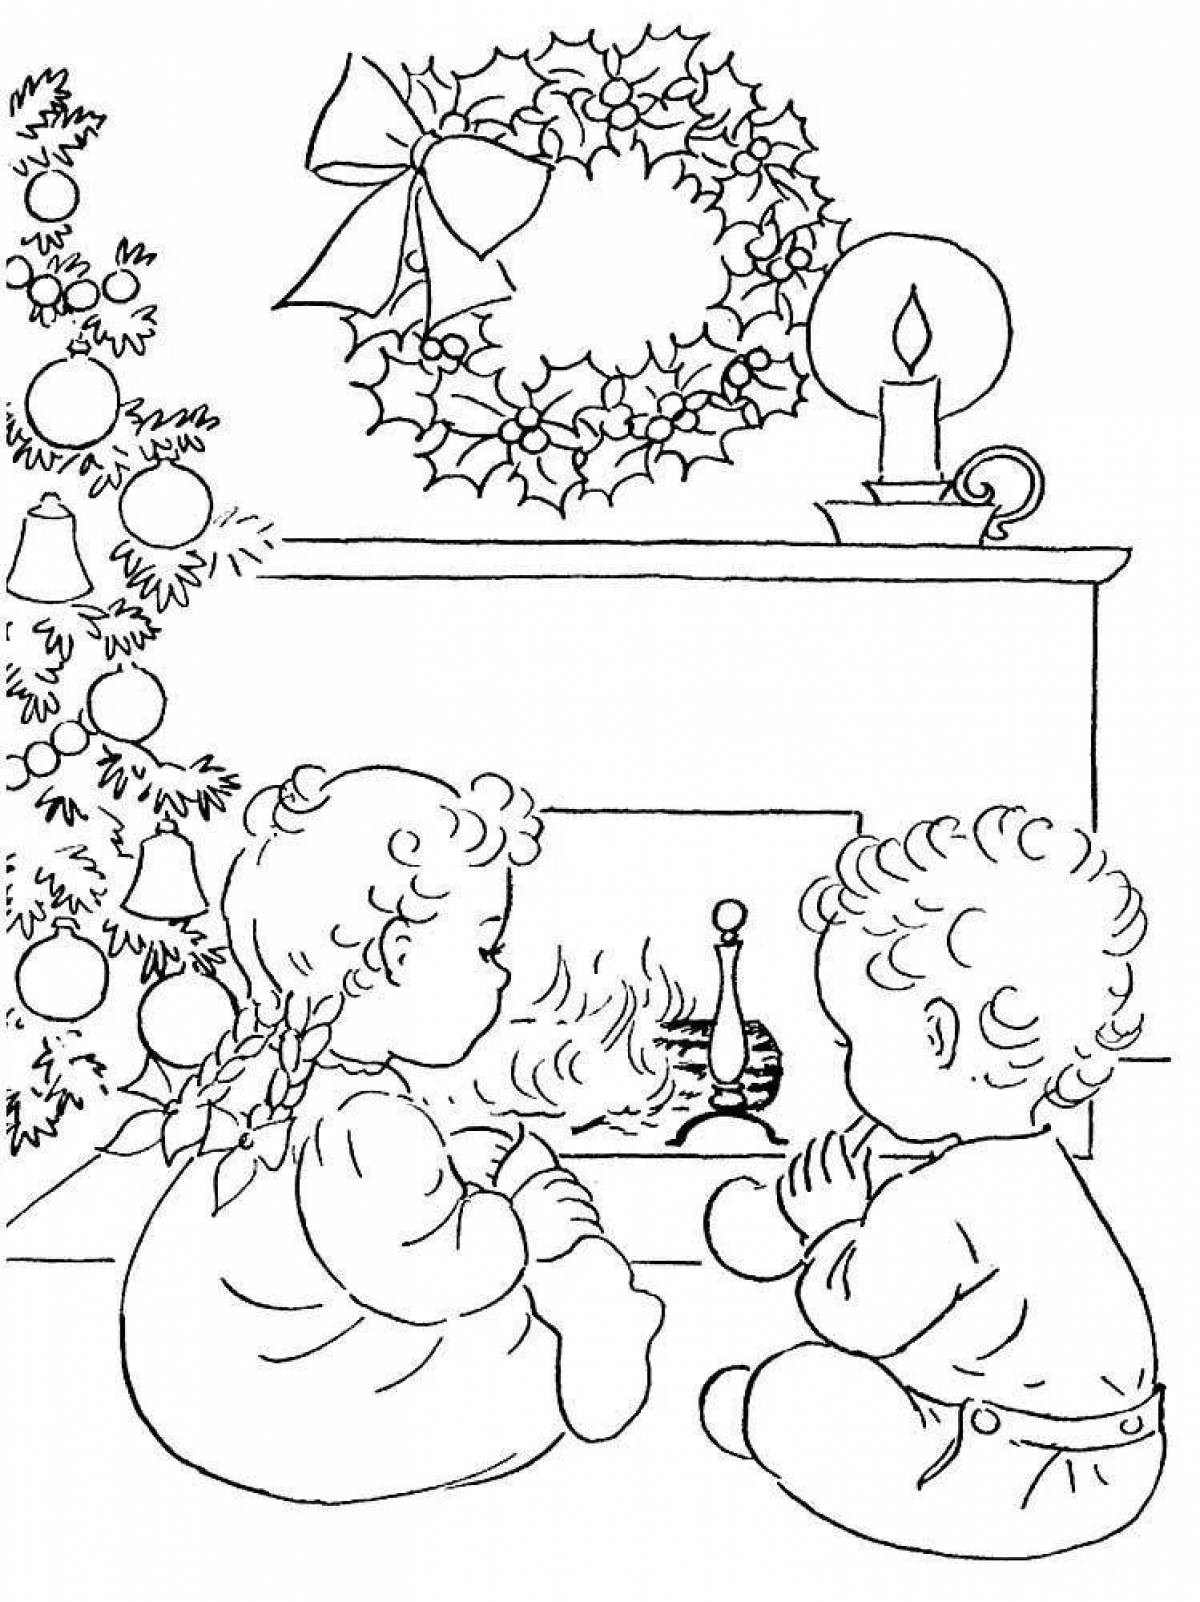 Colorful Christmas card coloring book